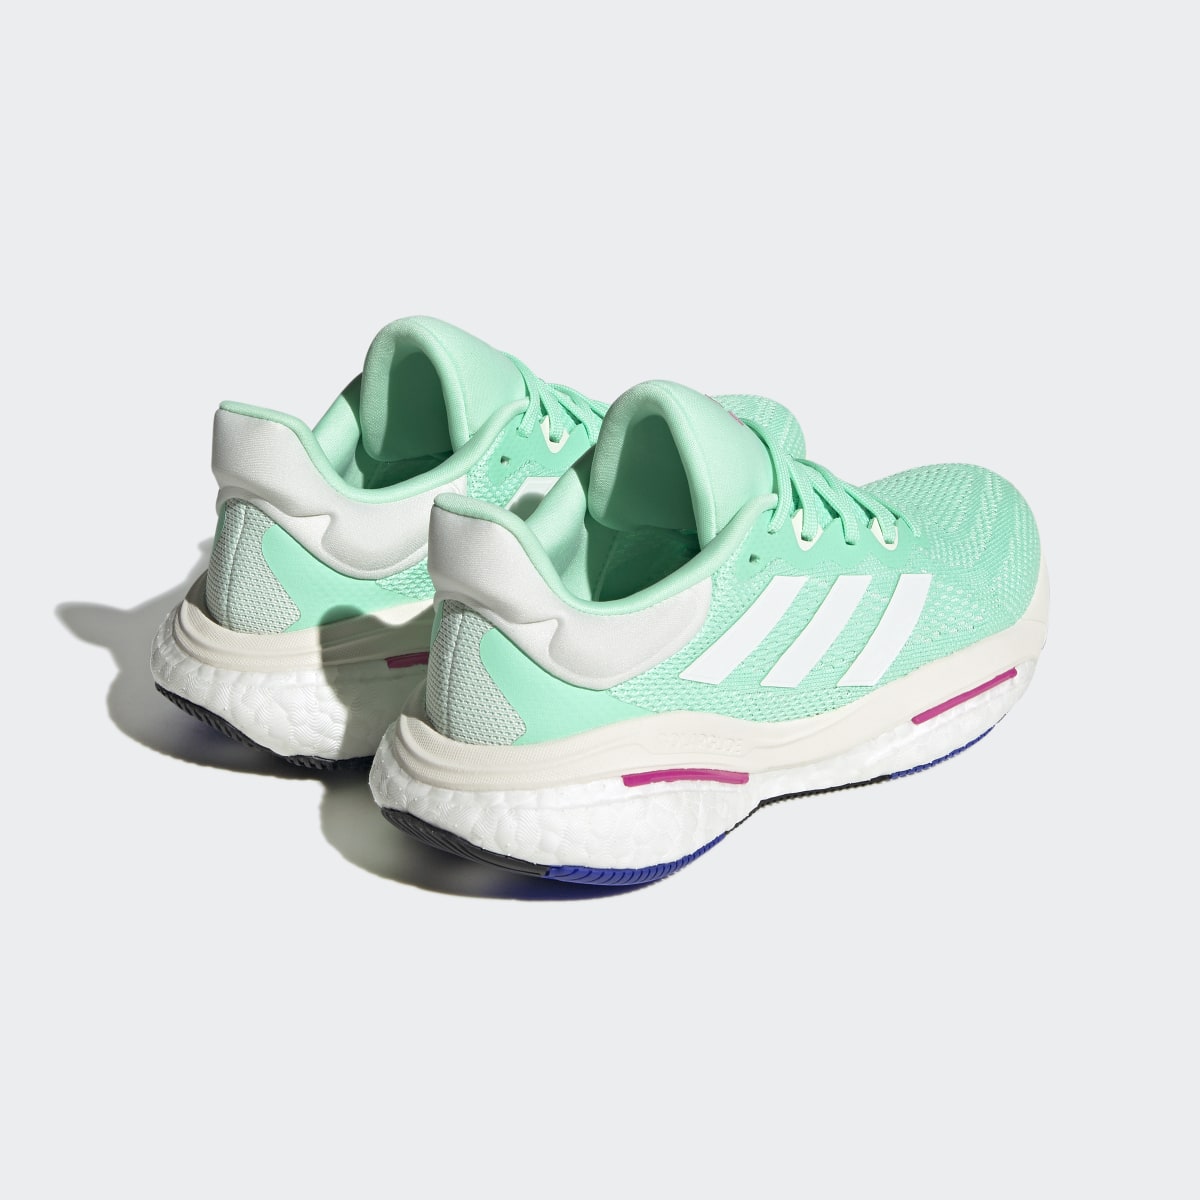 Adidas SOLARGLIDE 6 Shoes. 6